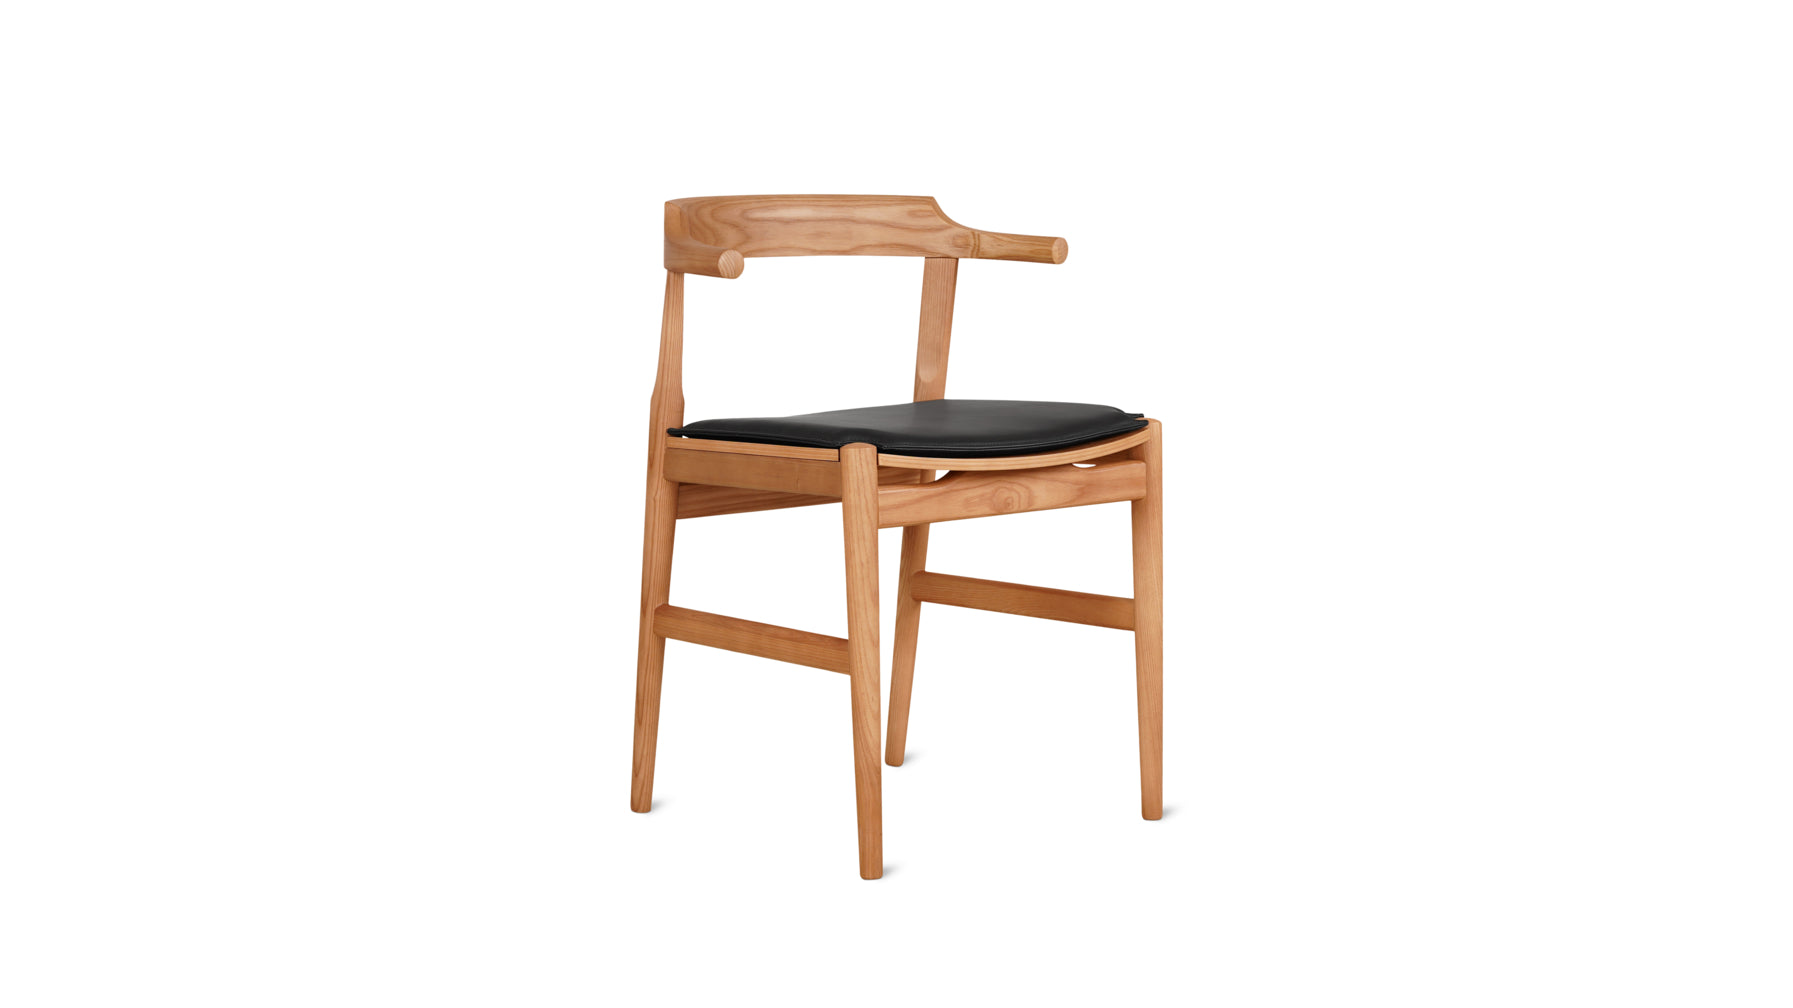 Tuck In Dining Chair with Cushion, White Oak, Wood Seat with Black Cushion - Image 2